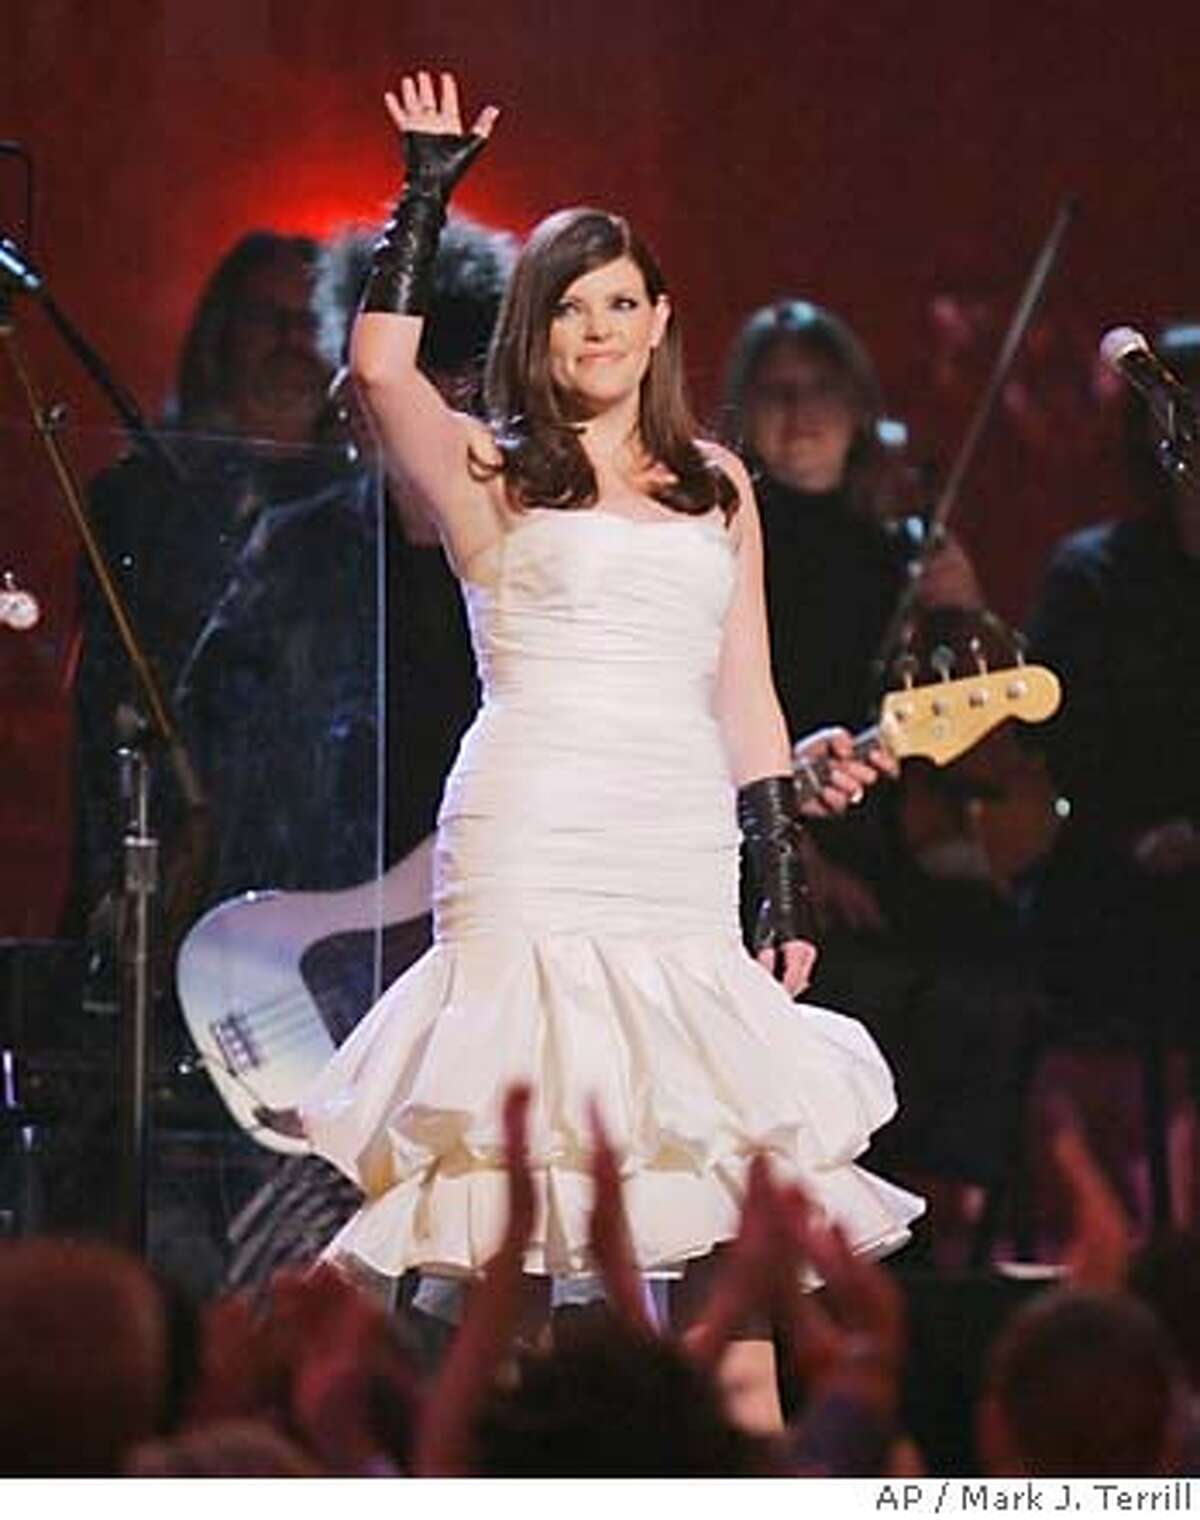 Natalie Maines and The Dixie Chicks perform the song "Not Ready to Make Nice" at the 49th Annual Grammy Awards on Sunday, Feb. 11, 2007, in Los Angeles. (AP Photo/Mark J. Terrill) Ran on: 02-16-2007 Dixie Chicks (from left) Emily Robison, Natalie Maines and Martie Maguire bask in the glow of their Grammy victories, which came despite being shut out by country radio after Maines 2003 remark about President Bush and the then-pending invasion of Iraq.